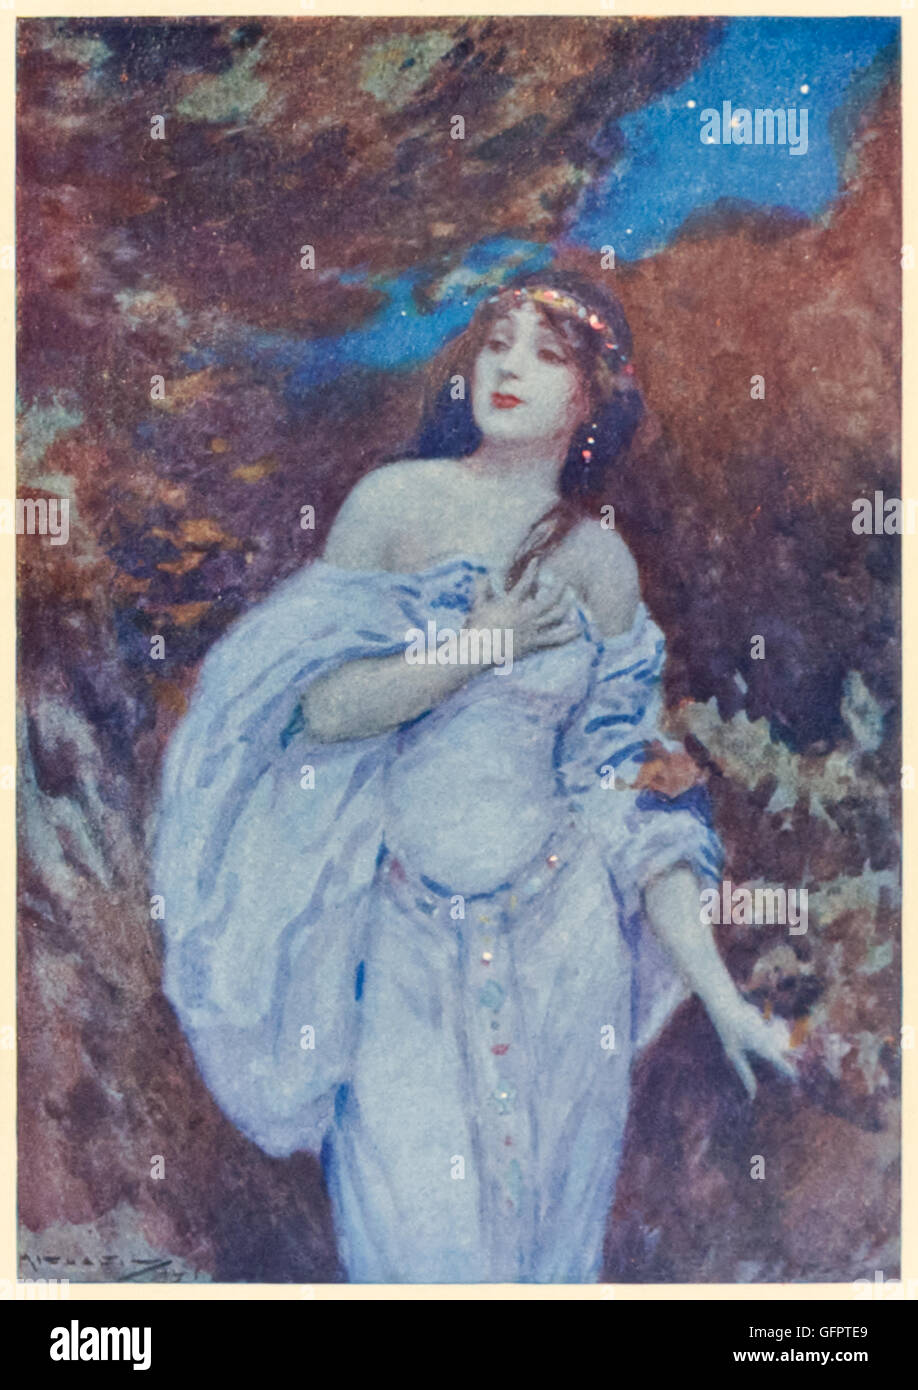 “There she sees a damsel bright, Drest in silken robe of white…” Geraldine in the forest from ‘Christabel’ by Samuel Taylor Coleridge (1772-1834), illustration by Arthur C. Michael. Stock Photo